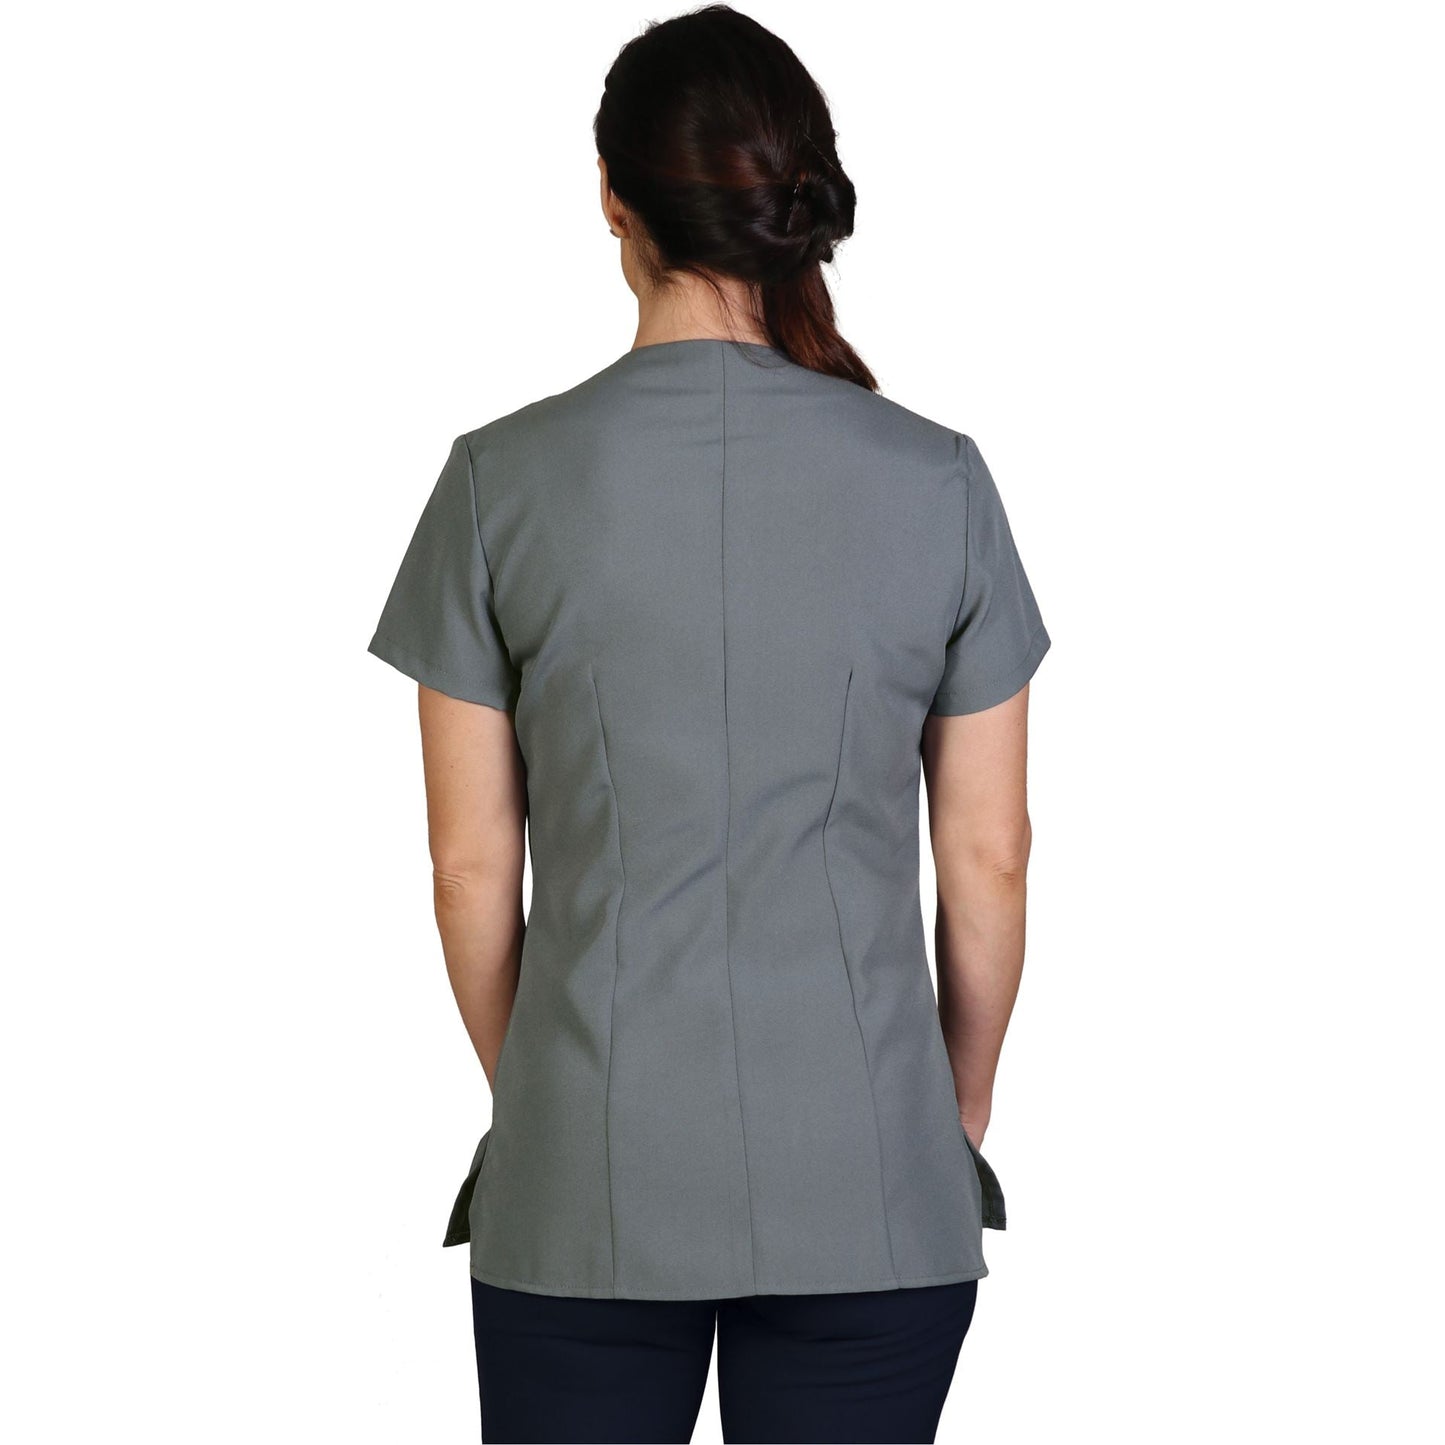 Lily Top Mid-Grey